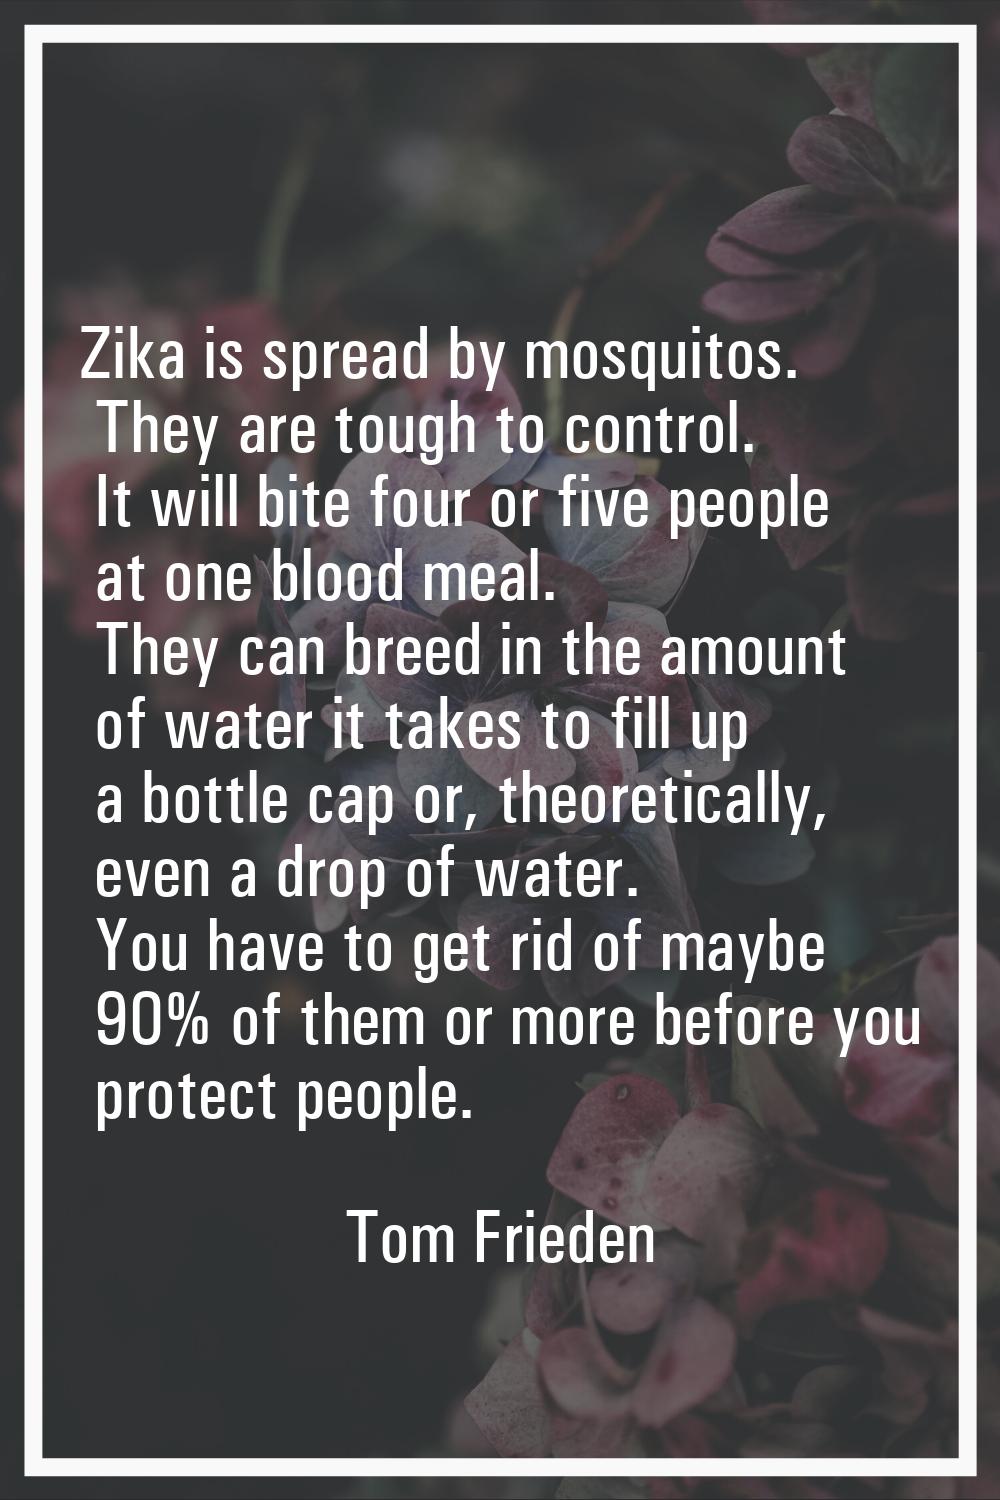 Zika is spread by mosquitos. They are tough to control. It will bite four or five people at one blo